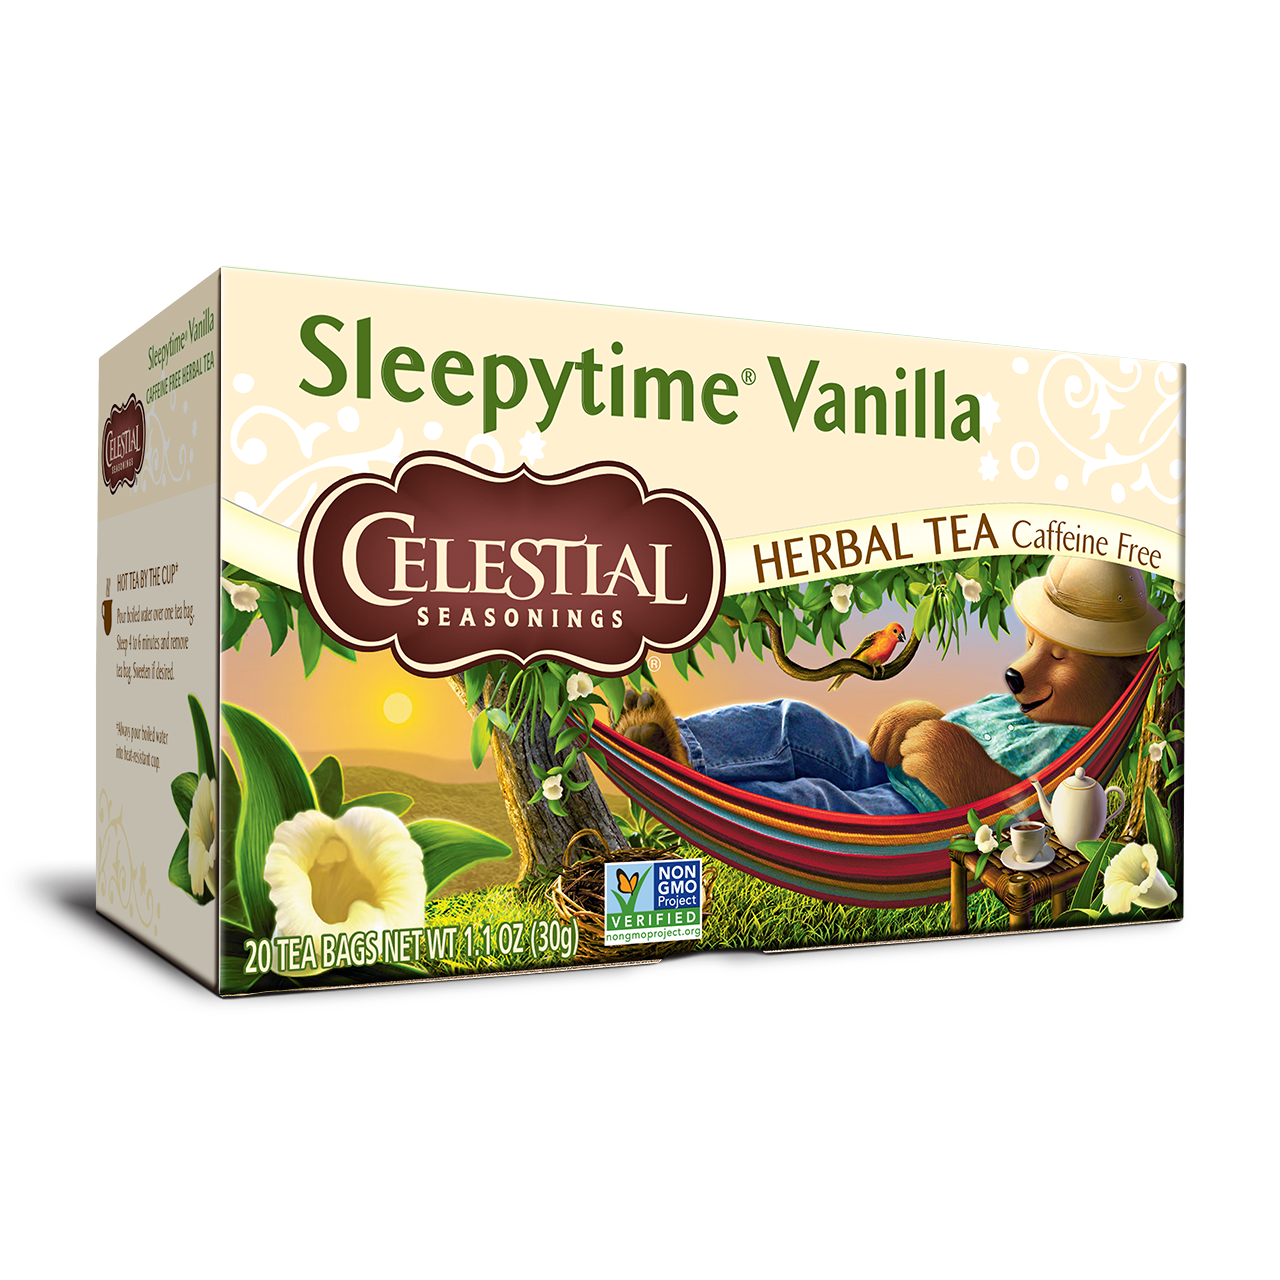 A Cup of Calm: Exploring the Ingredients in Sleepytime Tea缩略图